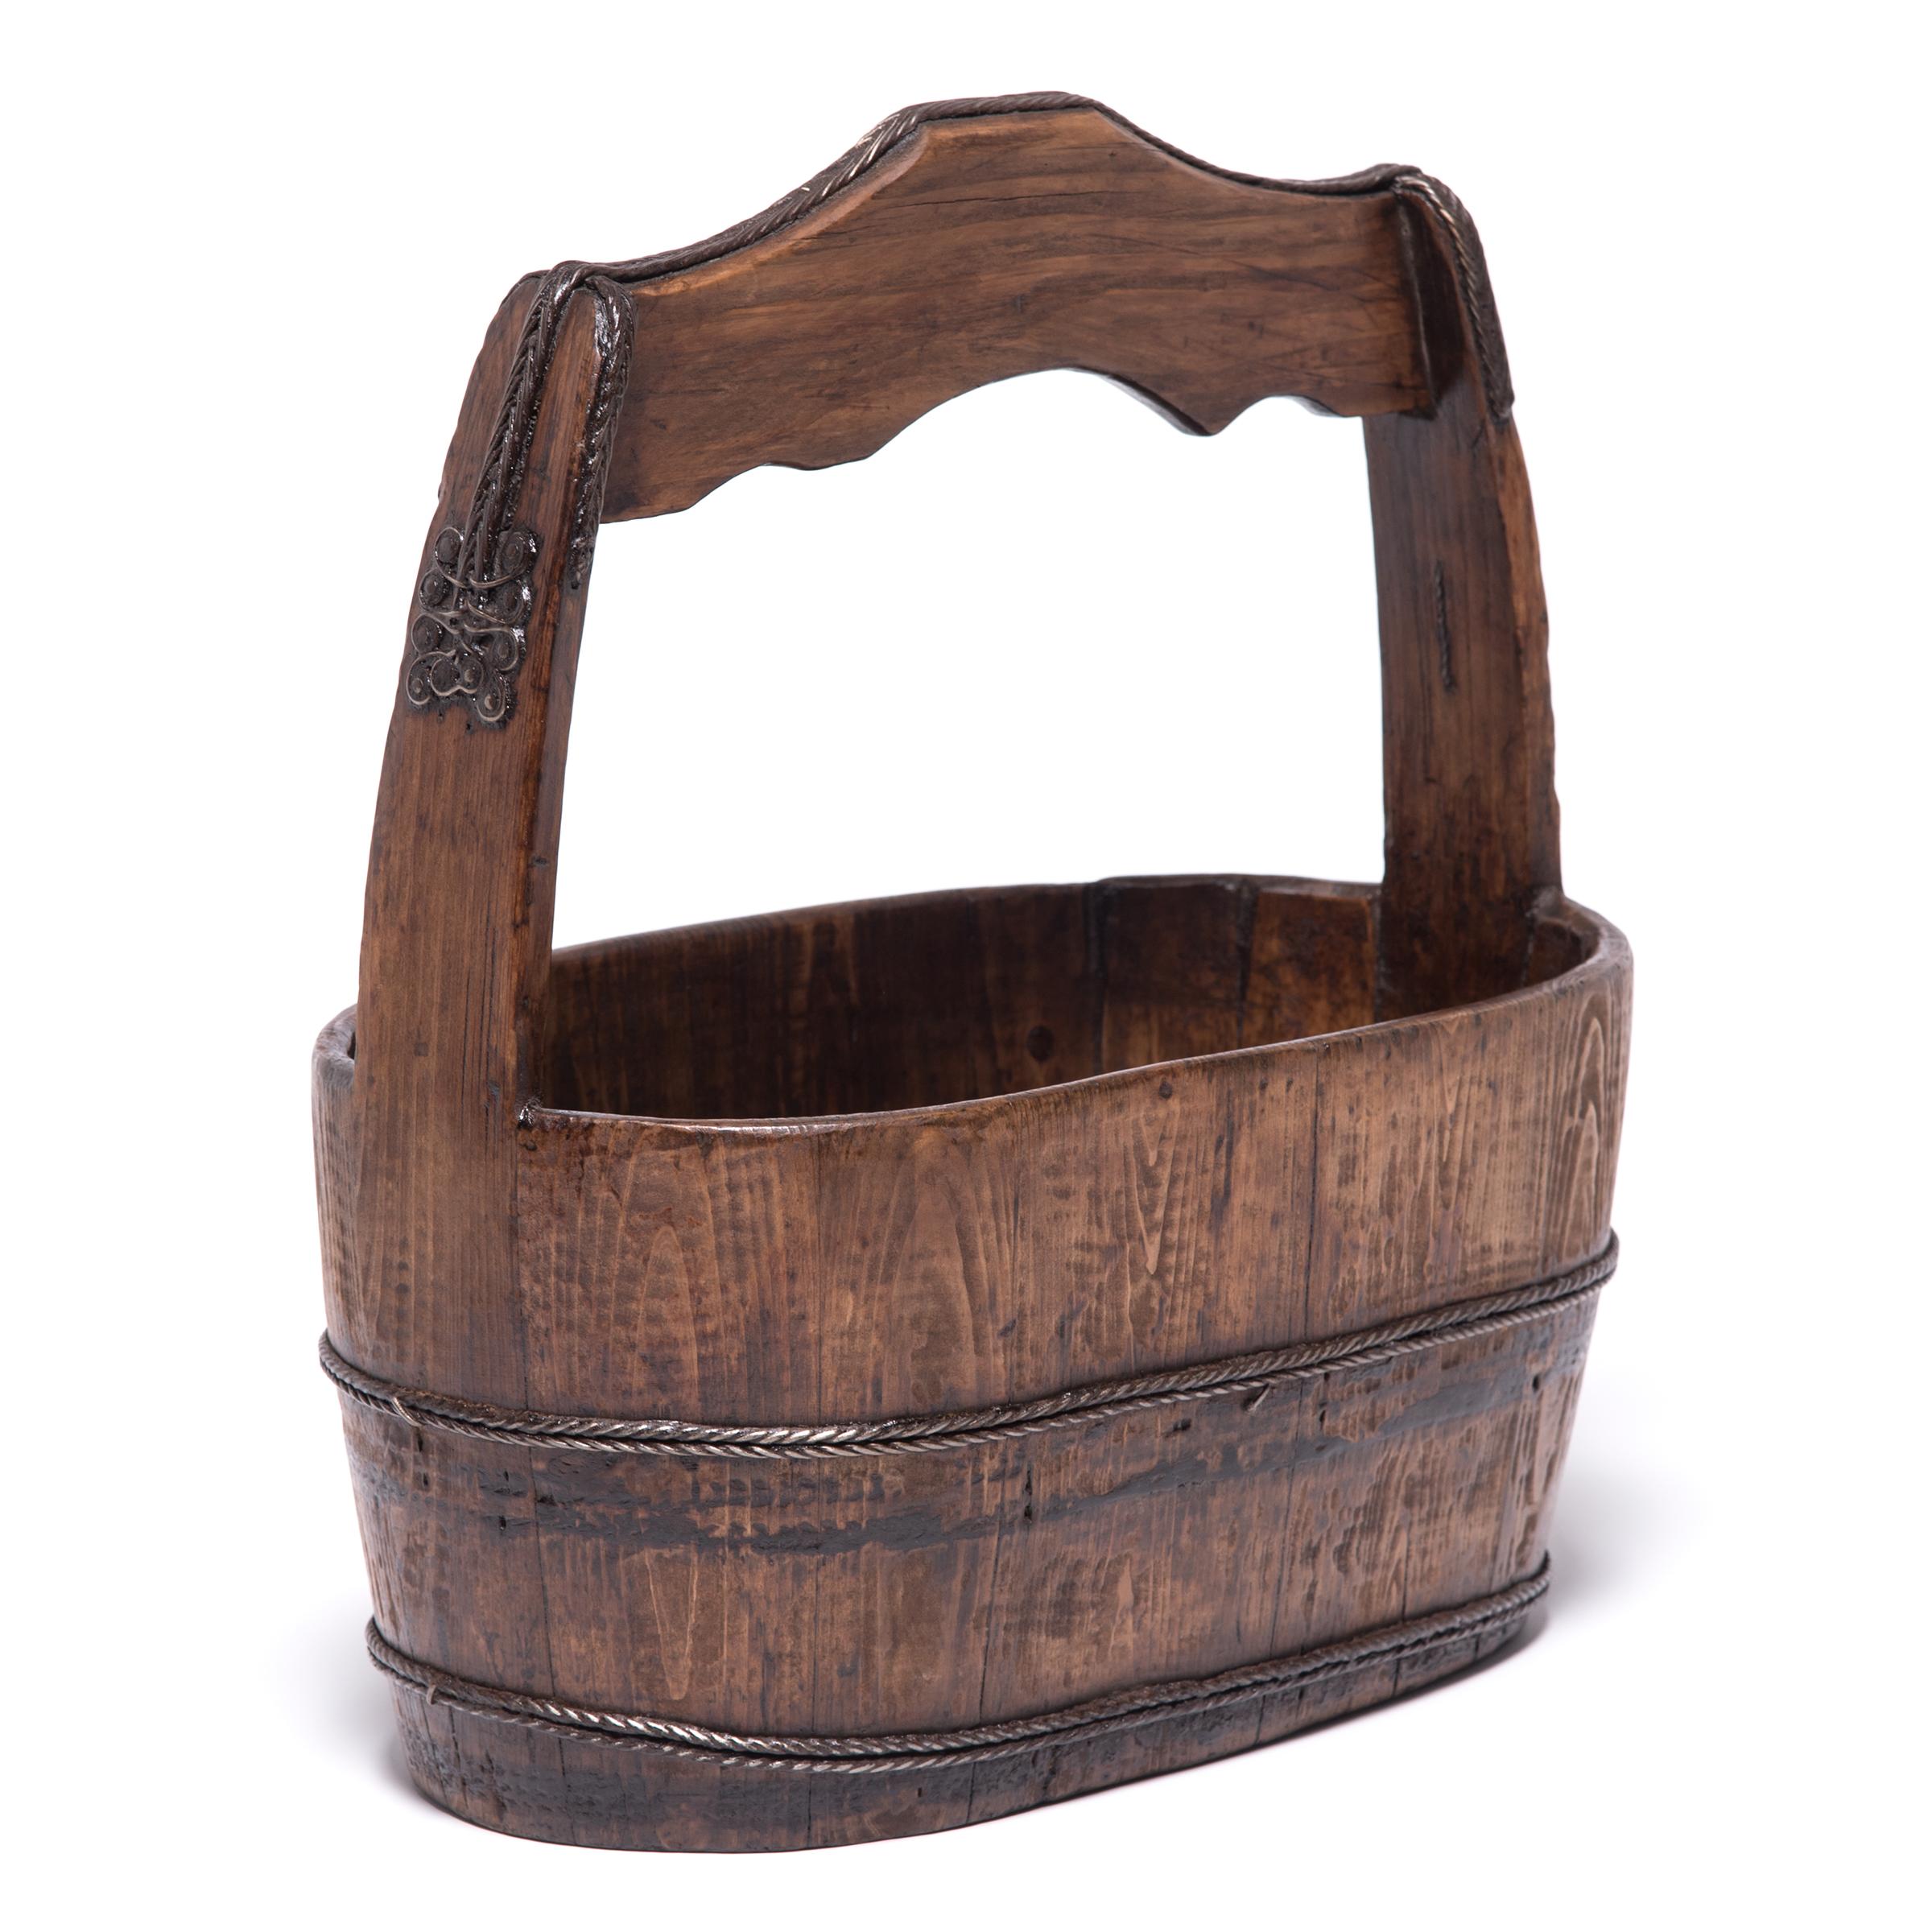 Carved from pine wood, this sturdy bucket made the hard work of harvesting grain a little easier for farmers living in the provincial region of Hebei. Paired with a similar container, the container was balanced on a pole threaded through the large